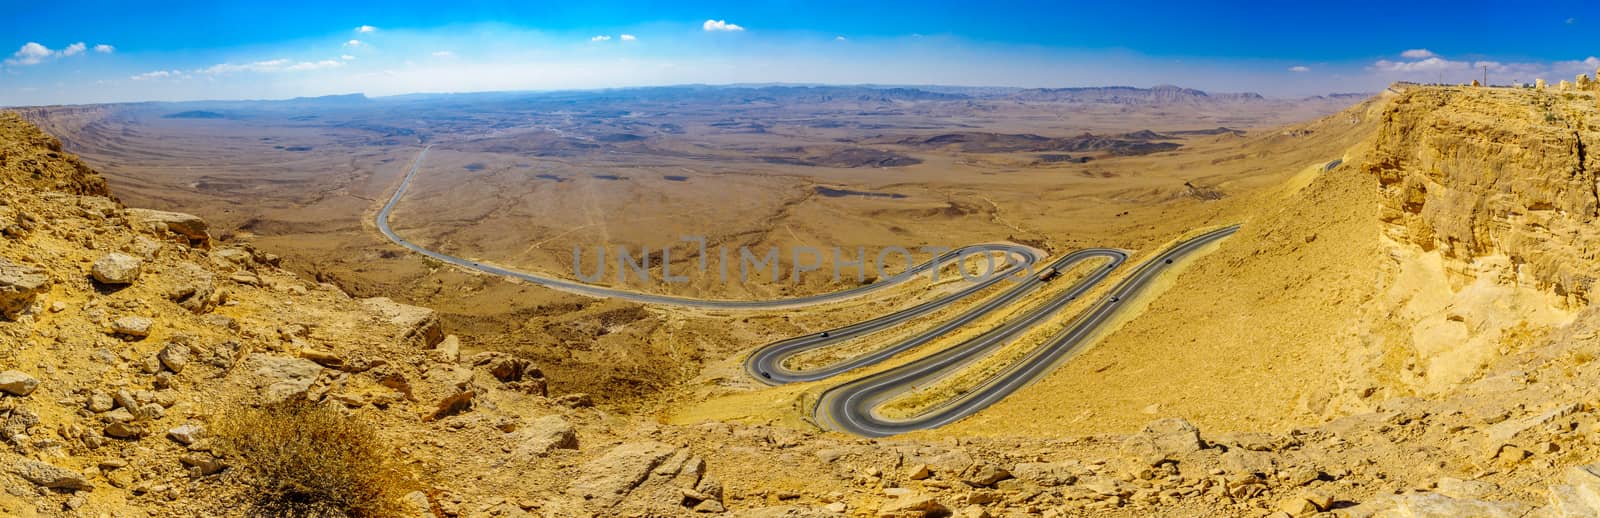 Panorama of cliffs, landscape, and hairpinned road, Makhtesh (cr by RnDmS